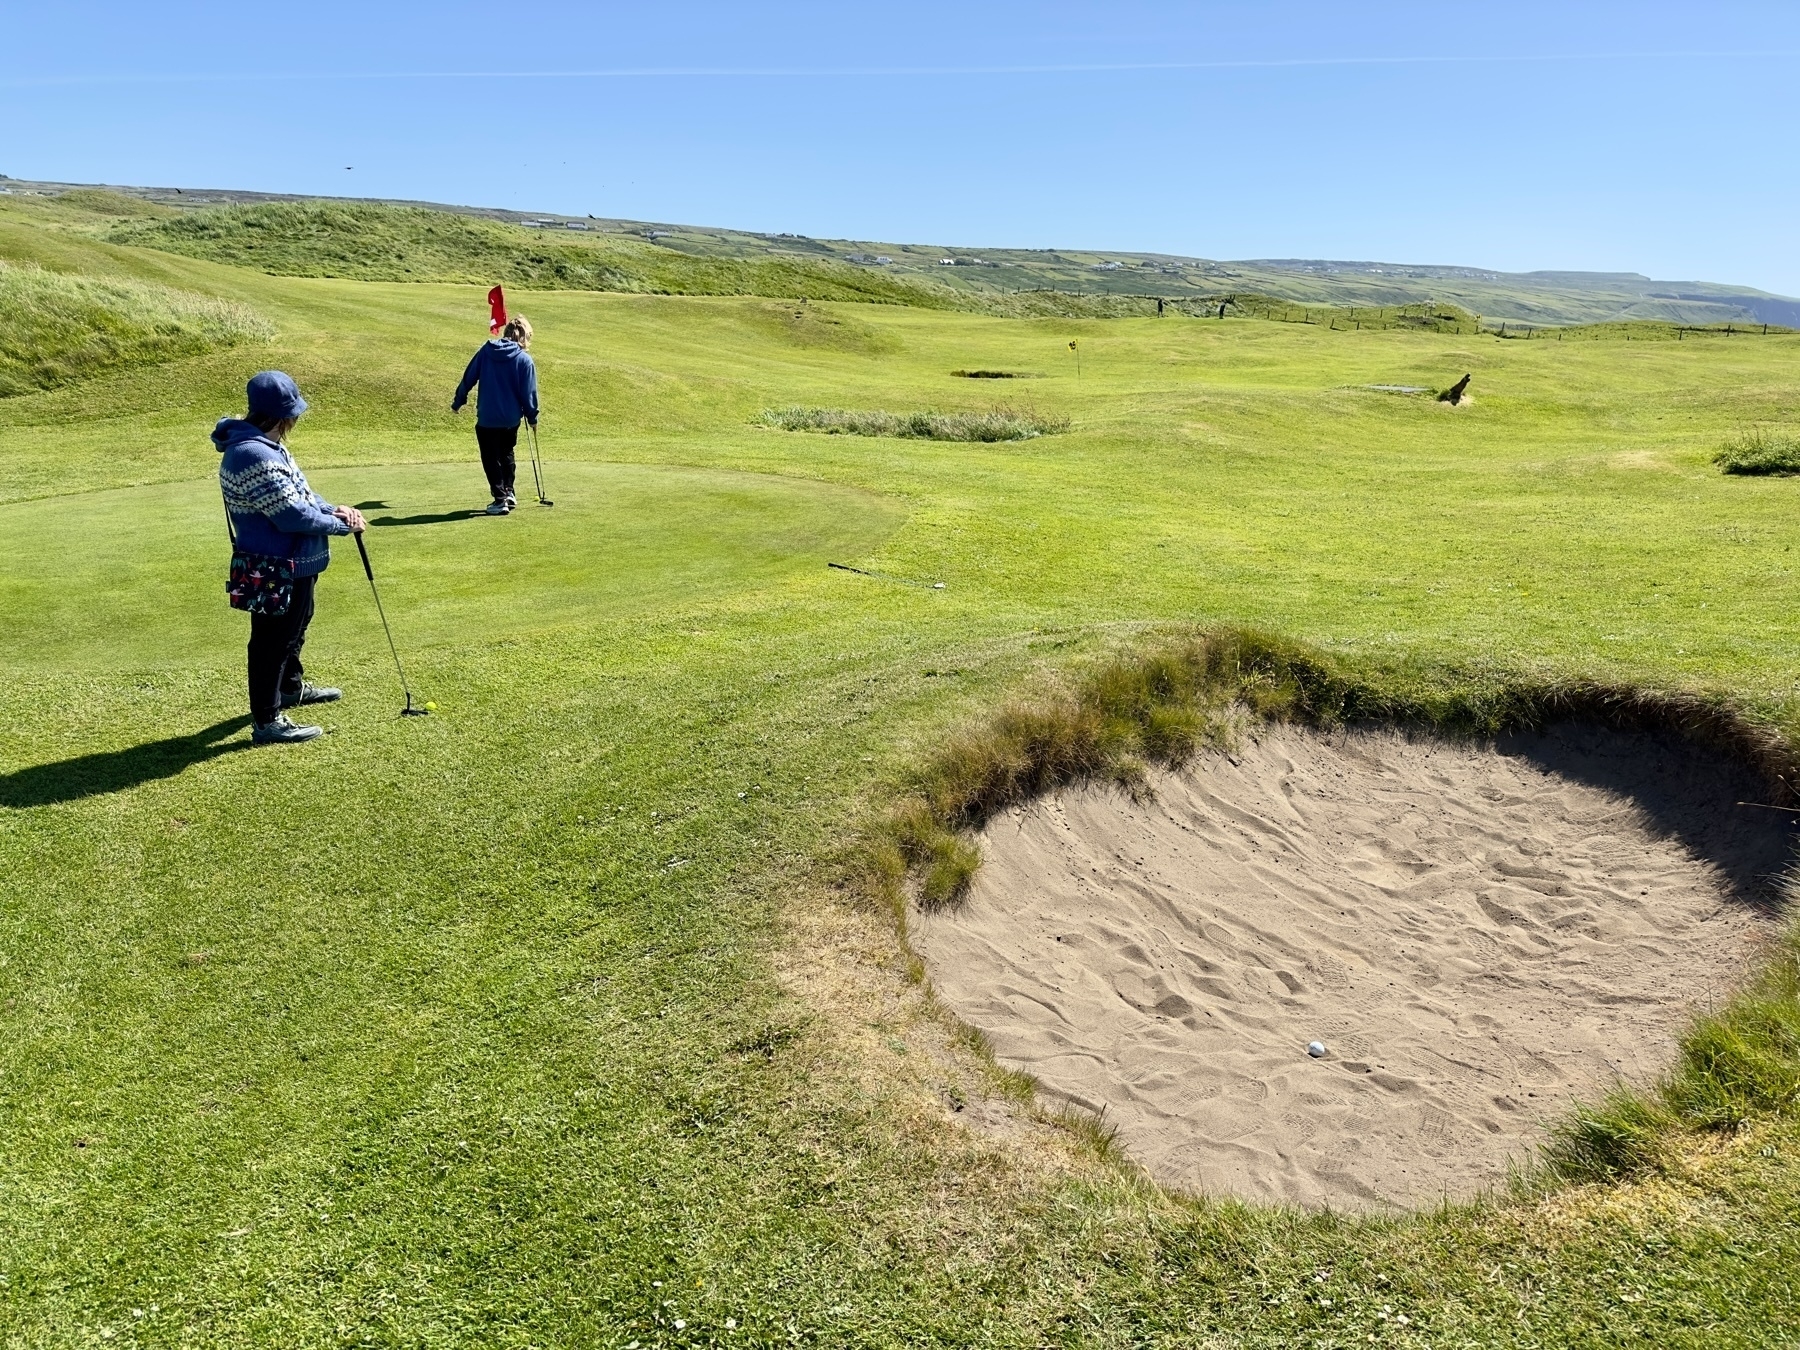 Auto-generated description: Two people are playing golf on a sunny day, with one preparing to putt near a sand bunker and the other standing near the flag on an open, grassy course.